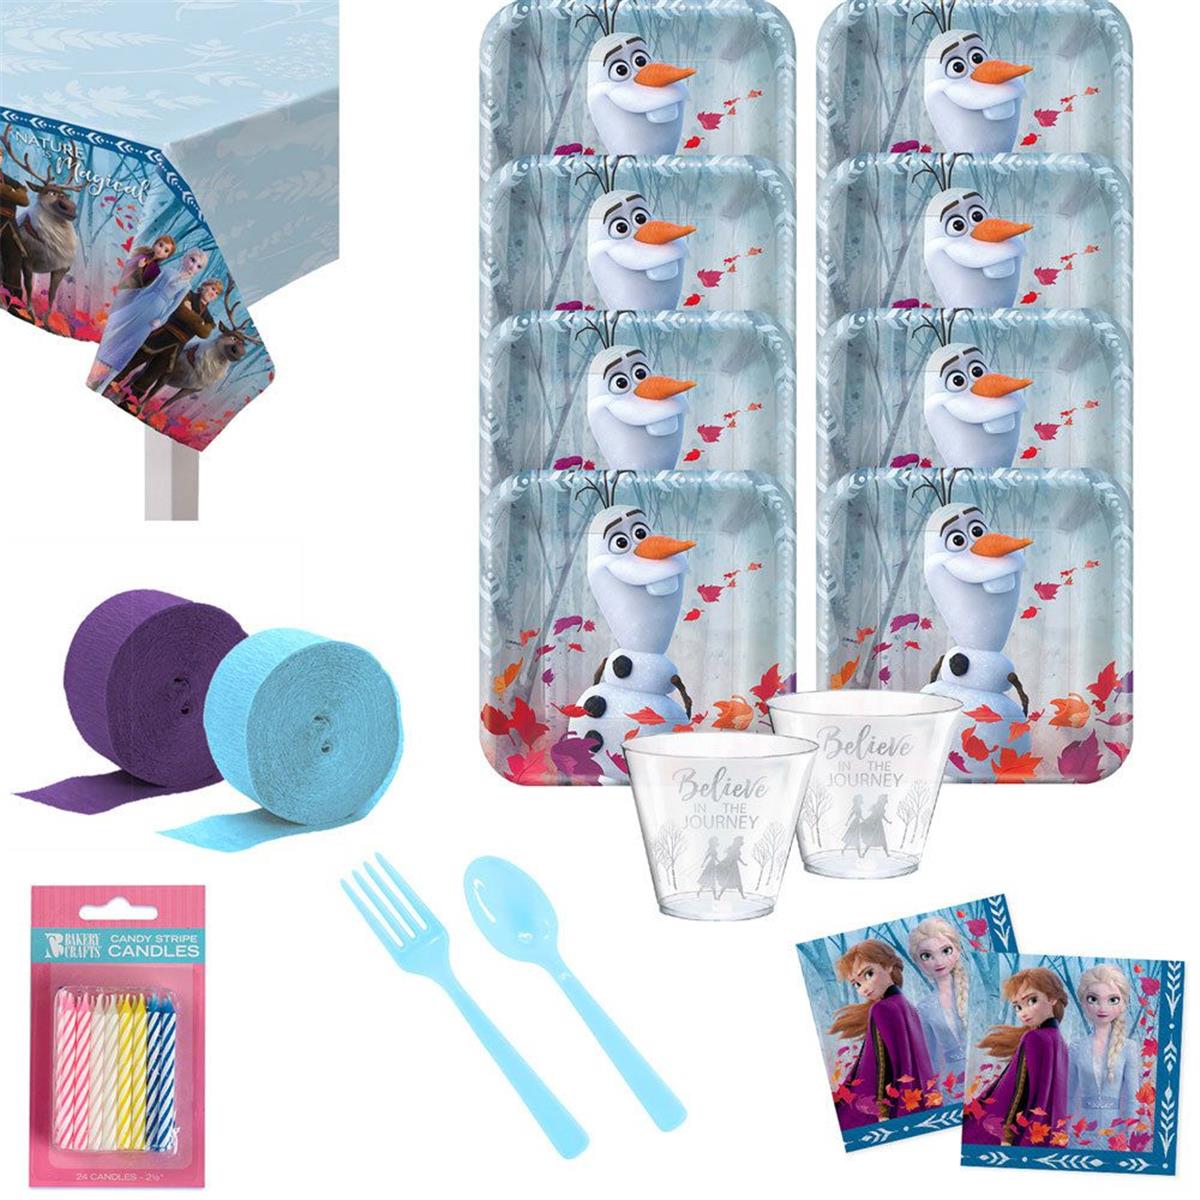 Picture of Birth9999 625382 Frozen 2 Deluxe Tableware Kit - Serves 8